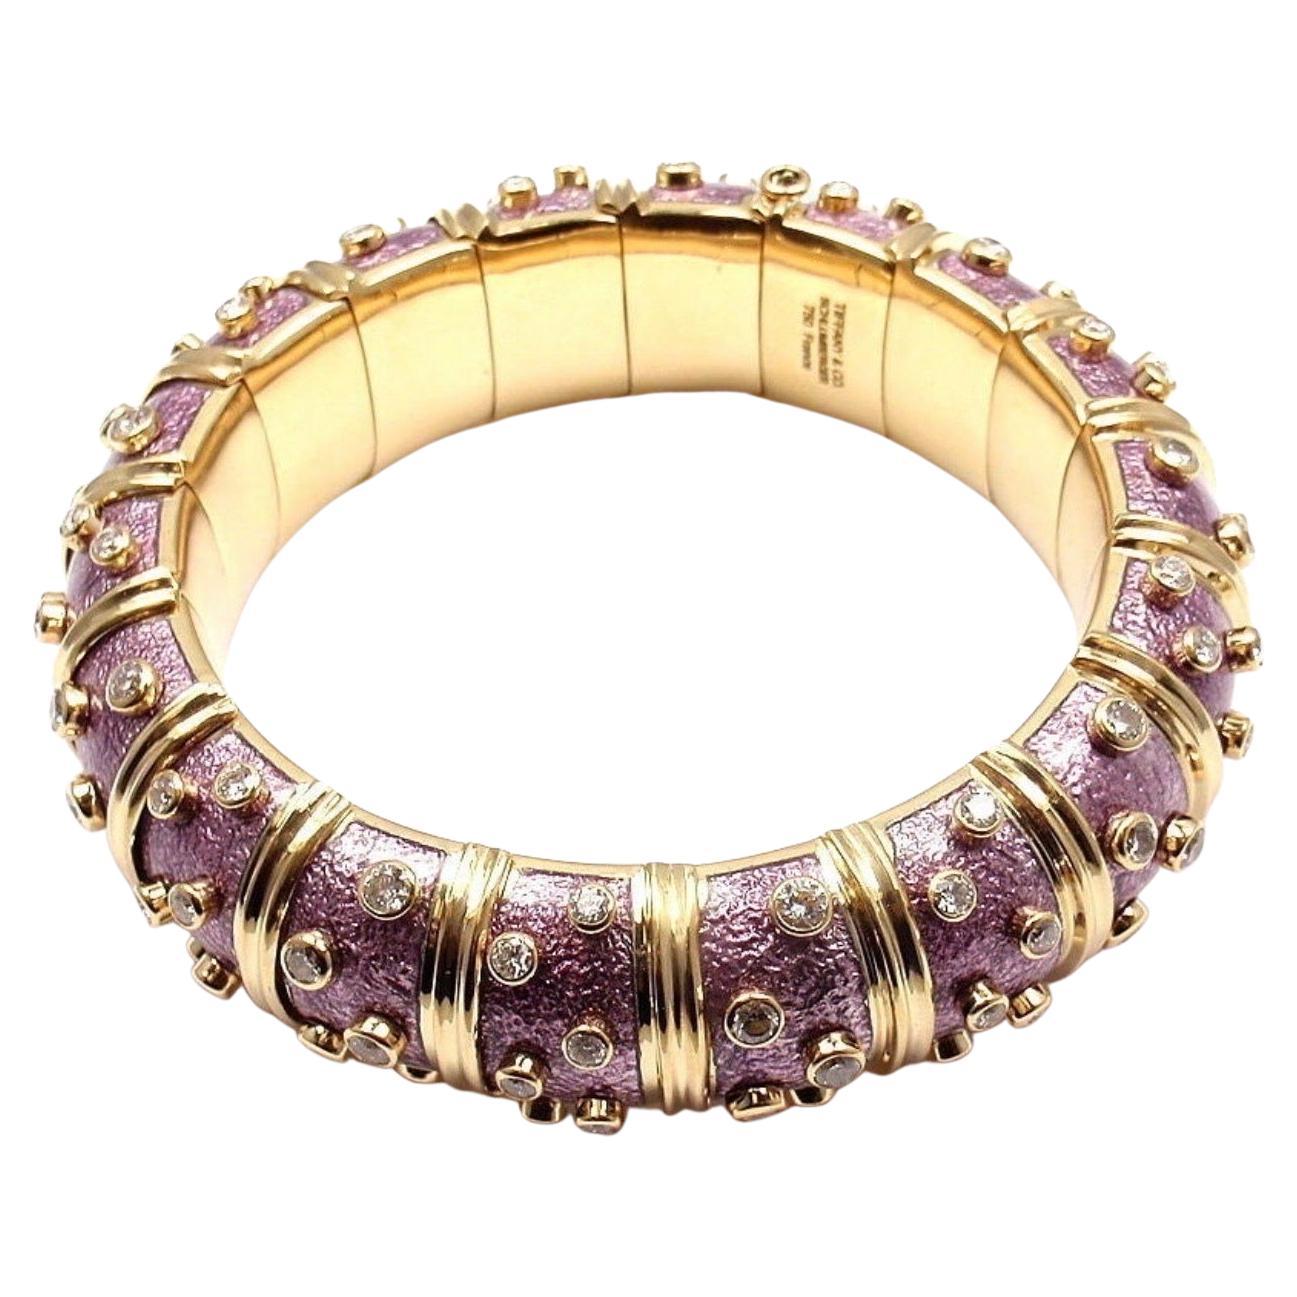 A DIAMOND AND Purple/ Lavender  ENAMEL BANGLE BRACELET, BY JEAN SCHLUMBERGER, TIFFANY & CO.
Very Pleasant Lavender color
Enamel bracelet designed by Jean Schlumberger for Tiffany & Co. Beautiful and iconic piece, made in Paris France at the atelier